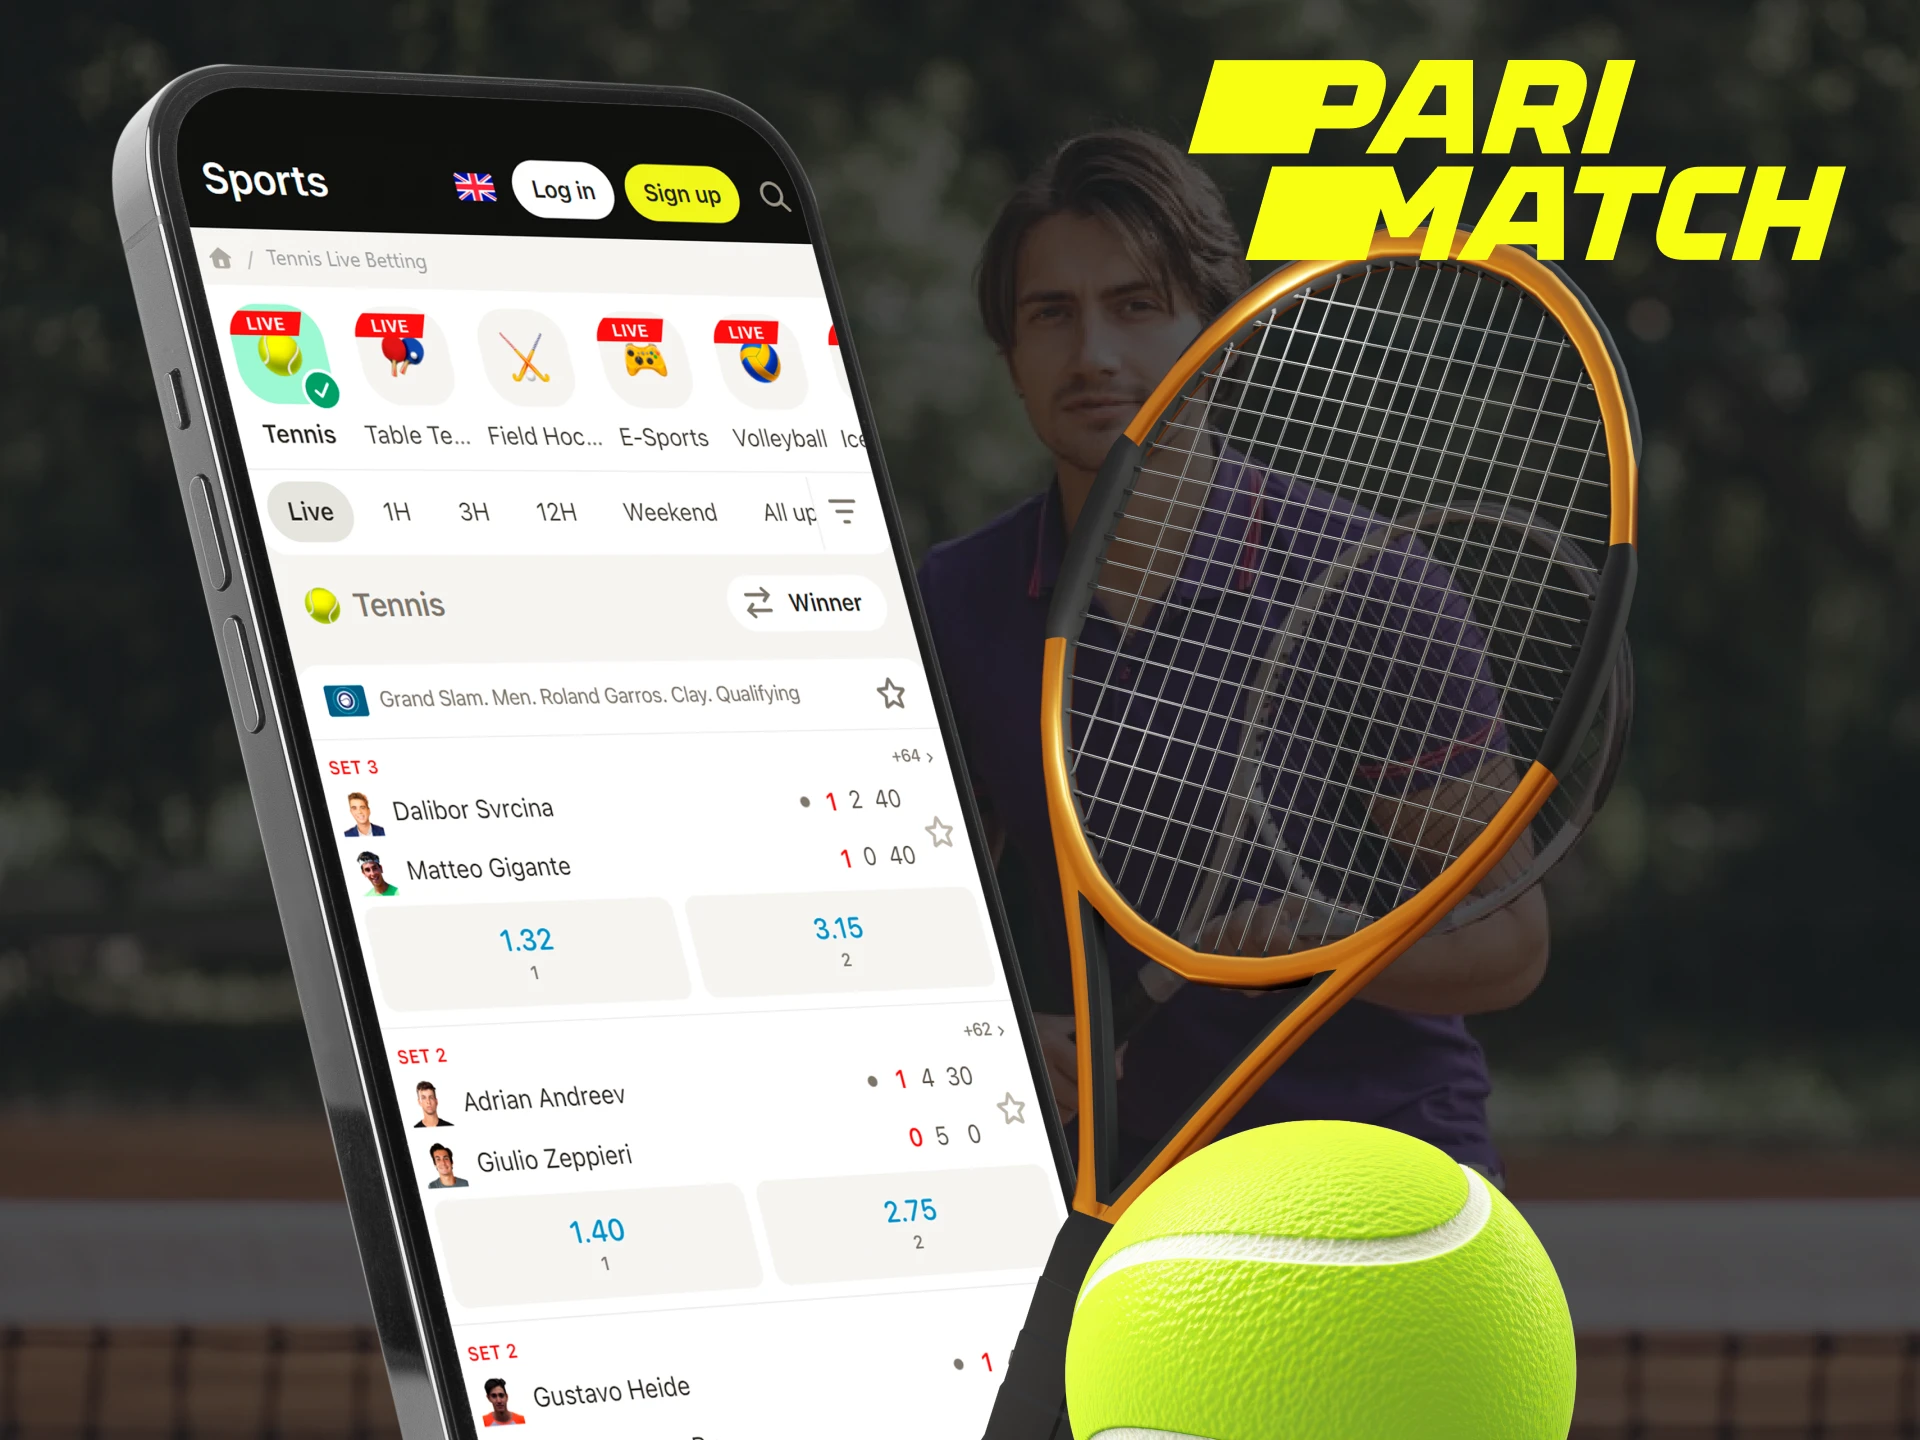 Tennis is one of the popular sports on the Parimatch app.